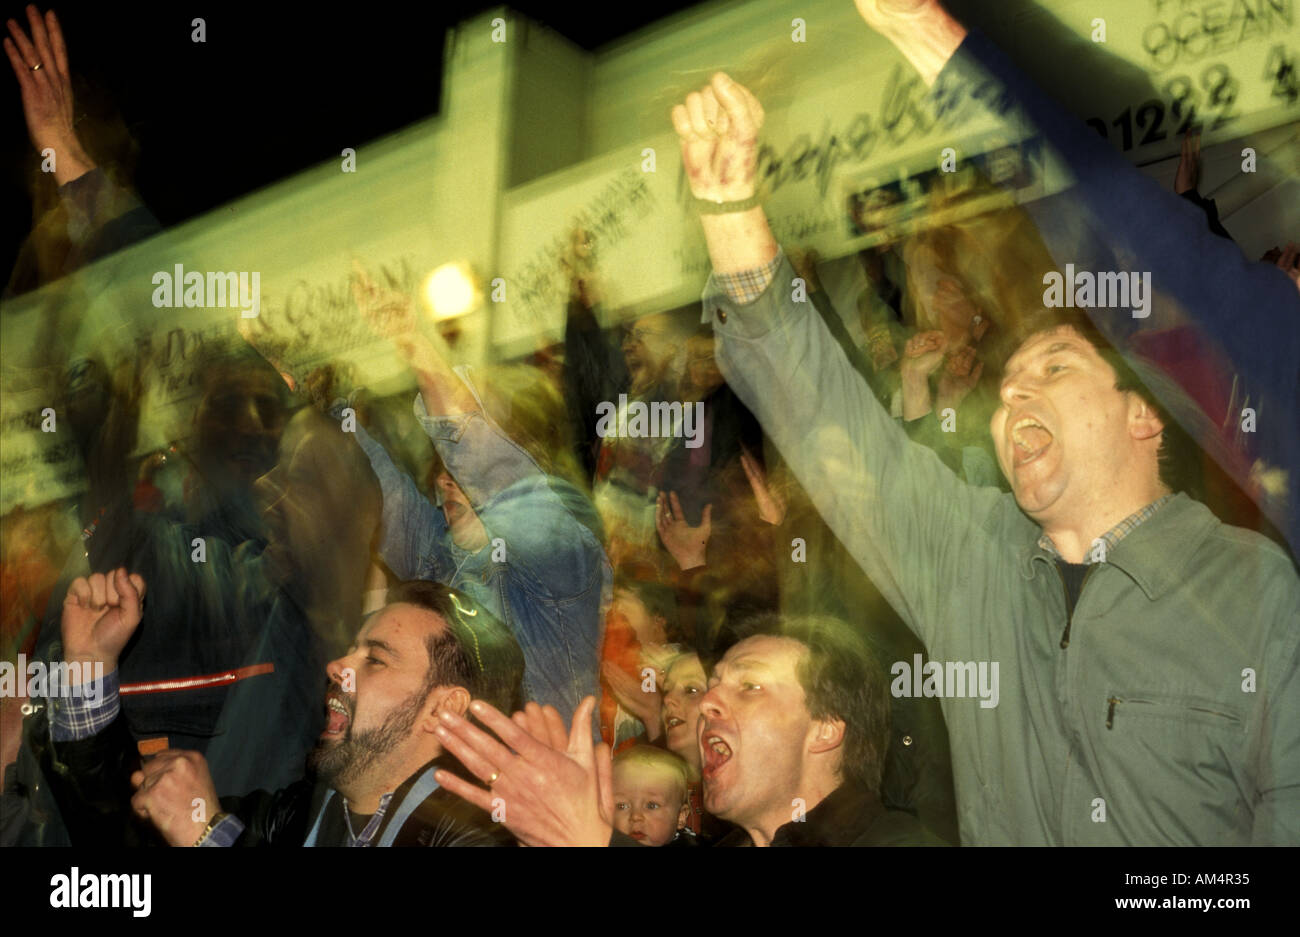 Fans cheer as cardiff ice hockey team score a goal in thier home stadium Stock Photo